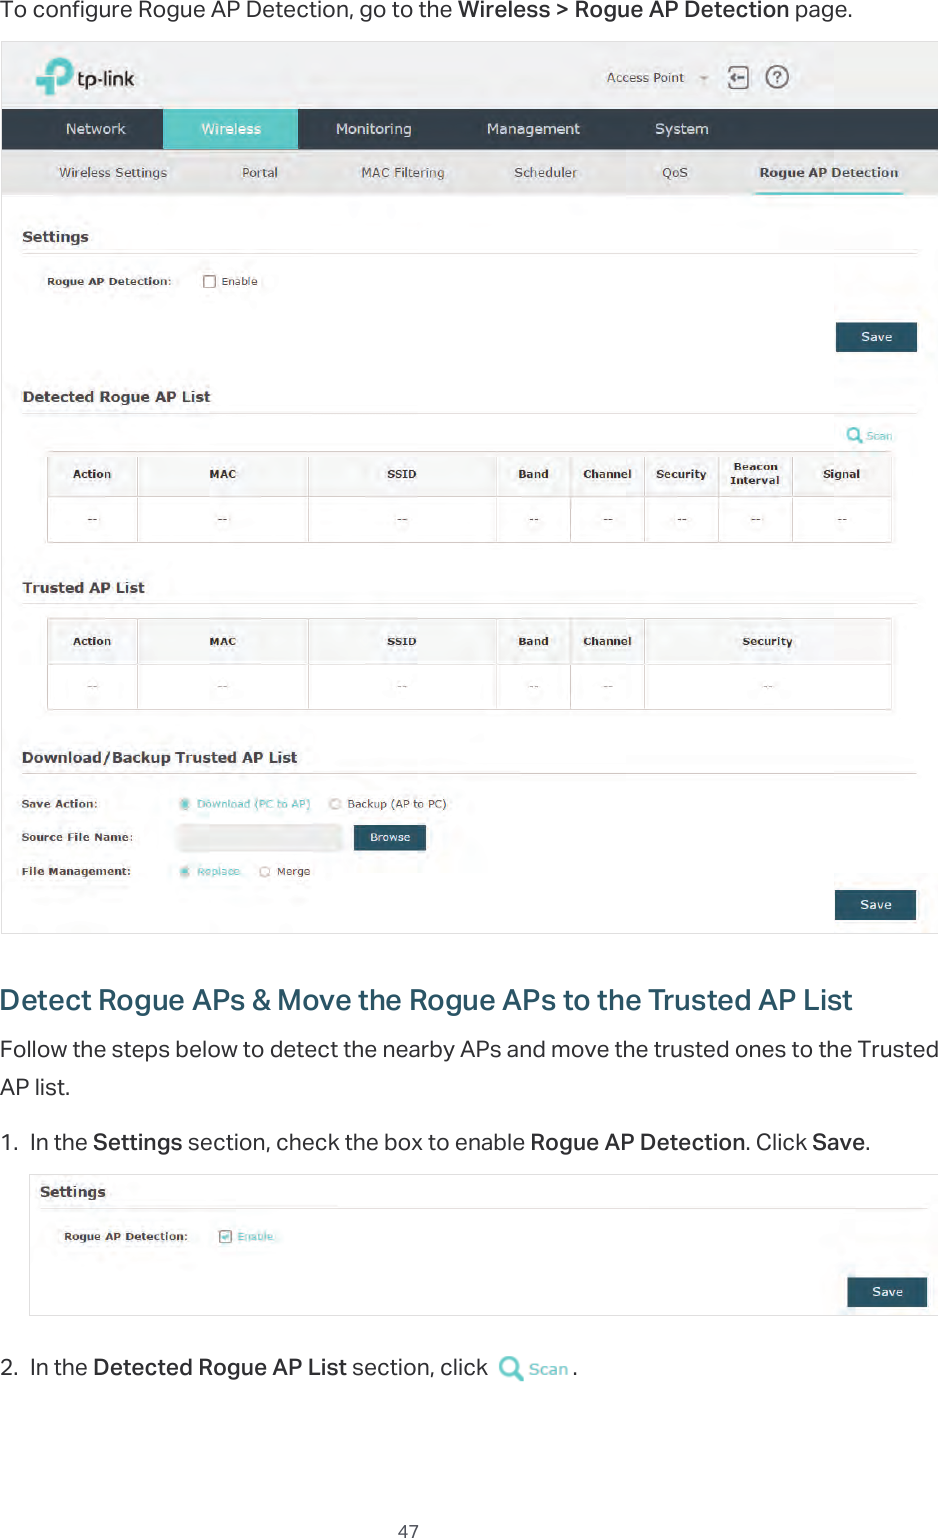  47To configure Rogue AP Detection, go to the Wireless &gt; Rogue AP Detection page.Detect Rogue APs &amp; Move the Rogue APs to the Trusted AP ListFollow the steps below to detect the nearby APs and move the trusted ones to the Trusted AP list.1. In the Settings section, check the box to enable Rogue AP Detection. Click Save.2. In the Detected Rogue AP List section, click  .